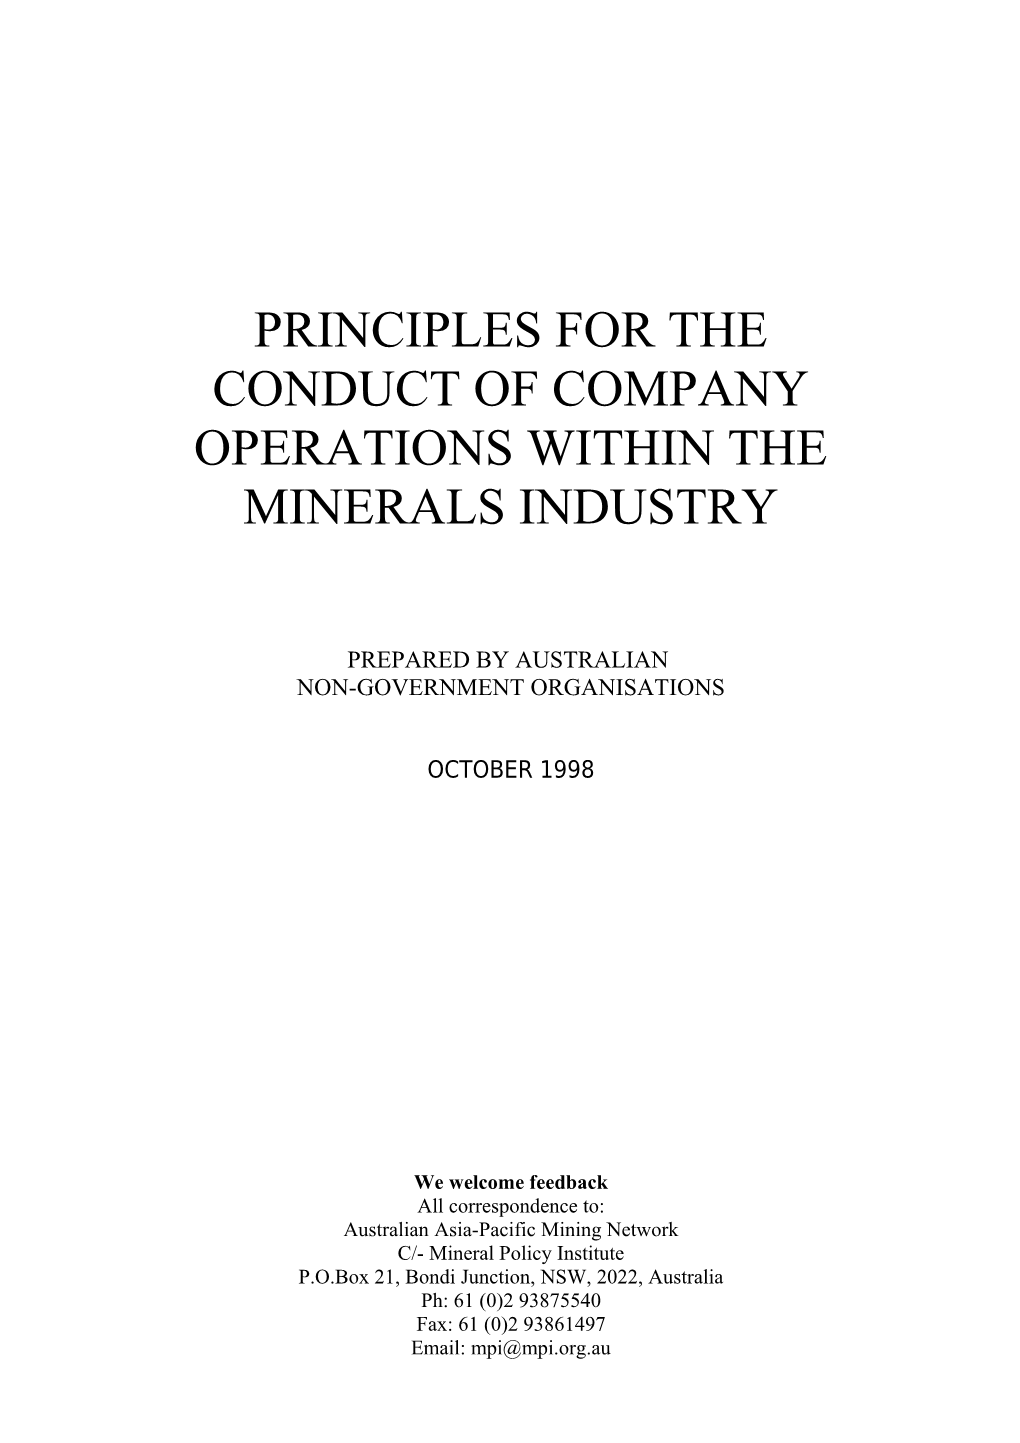 Principles for the Conduct of Company Operations Within the Minerals Industry